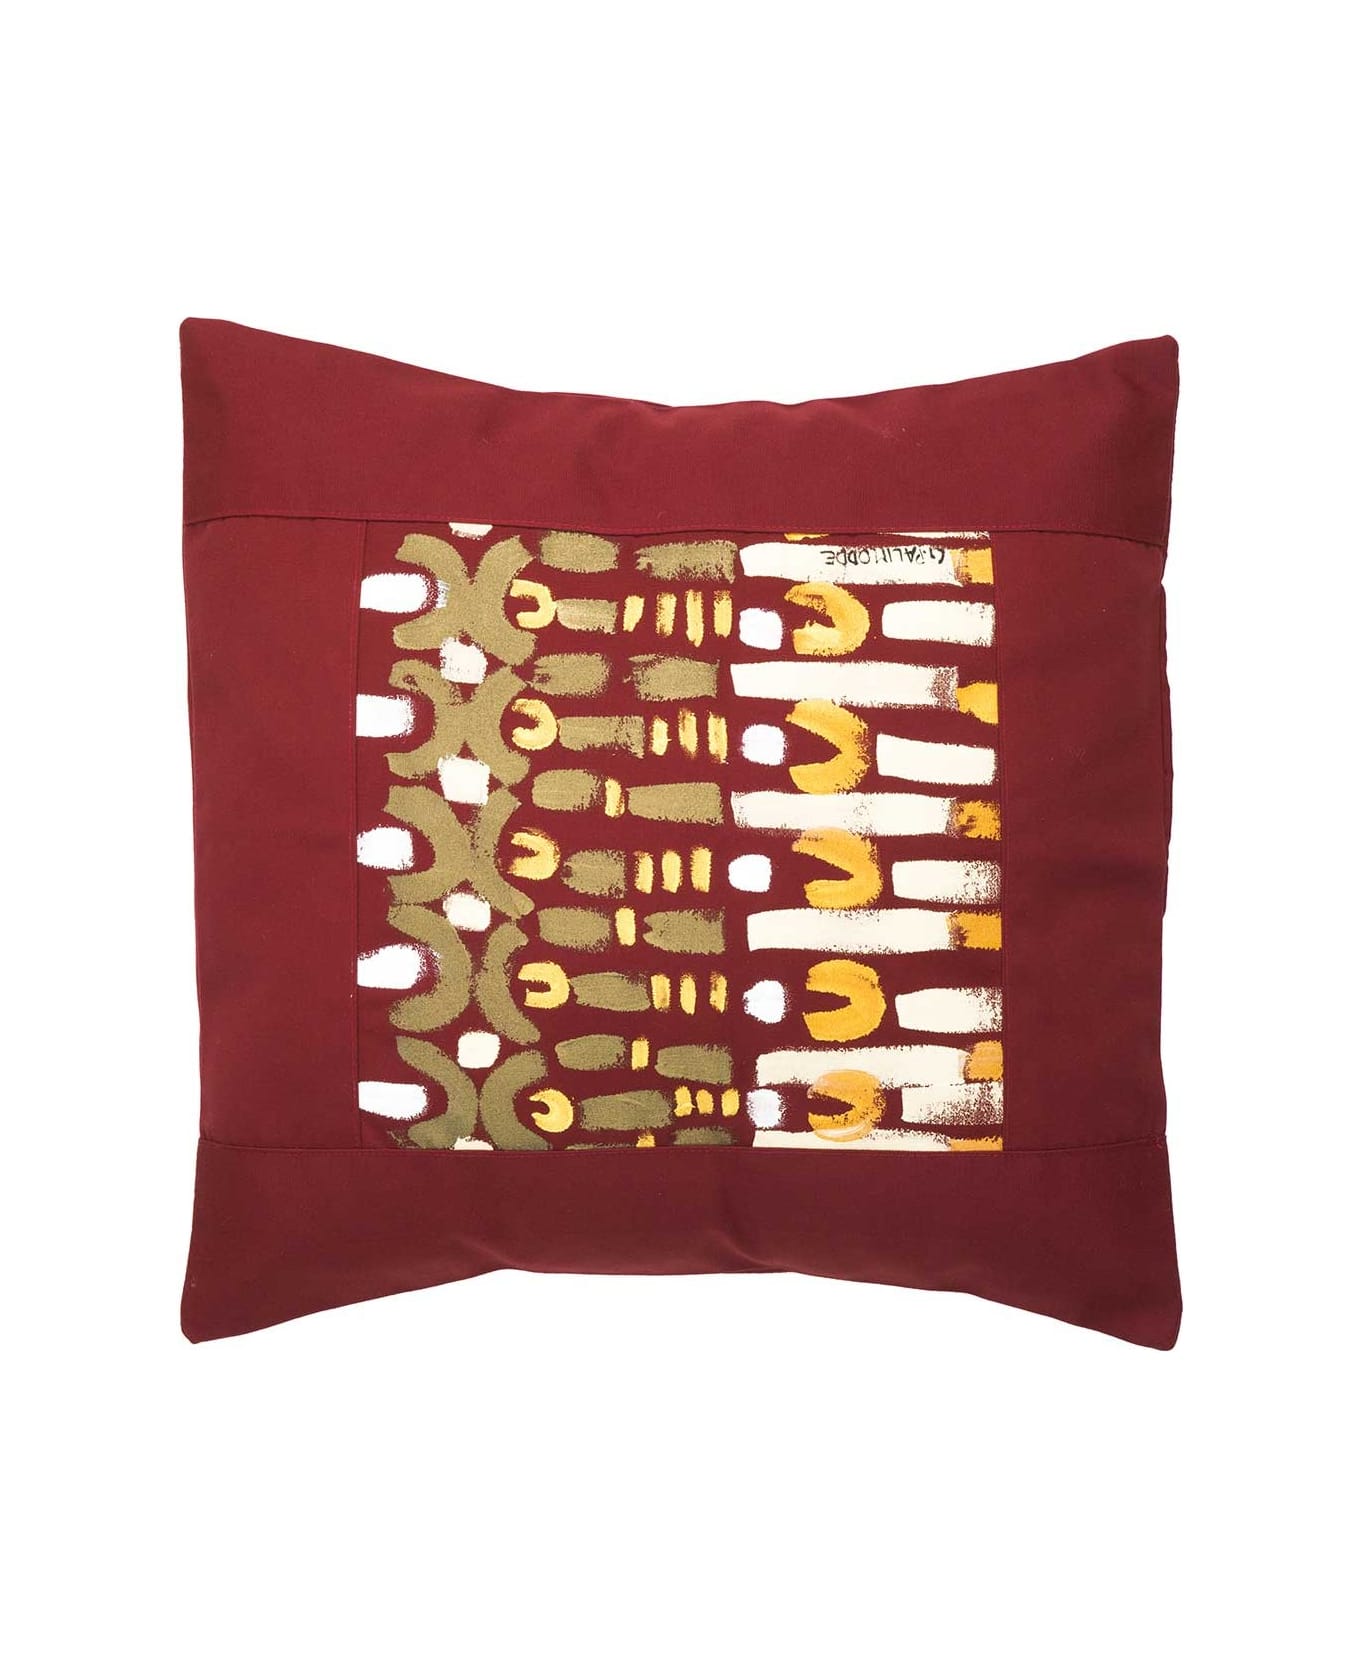 Le Botteghe su Gologone Acrylic Hand Painted Outdoor Cushion 60x60 cm - Red Fantasy